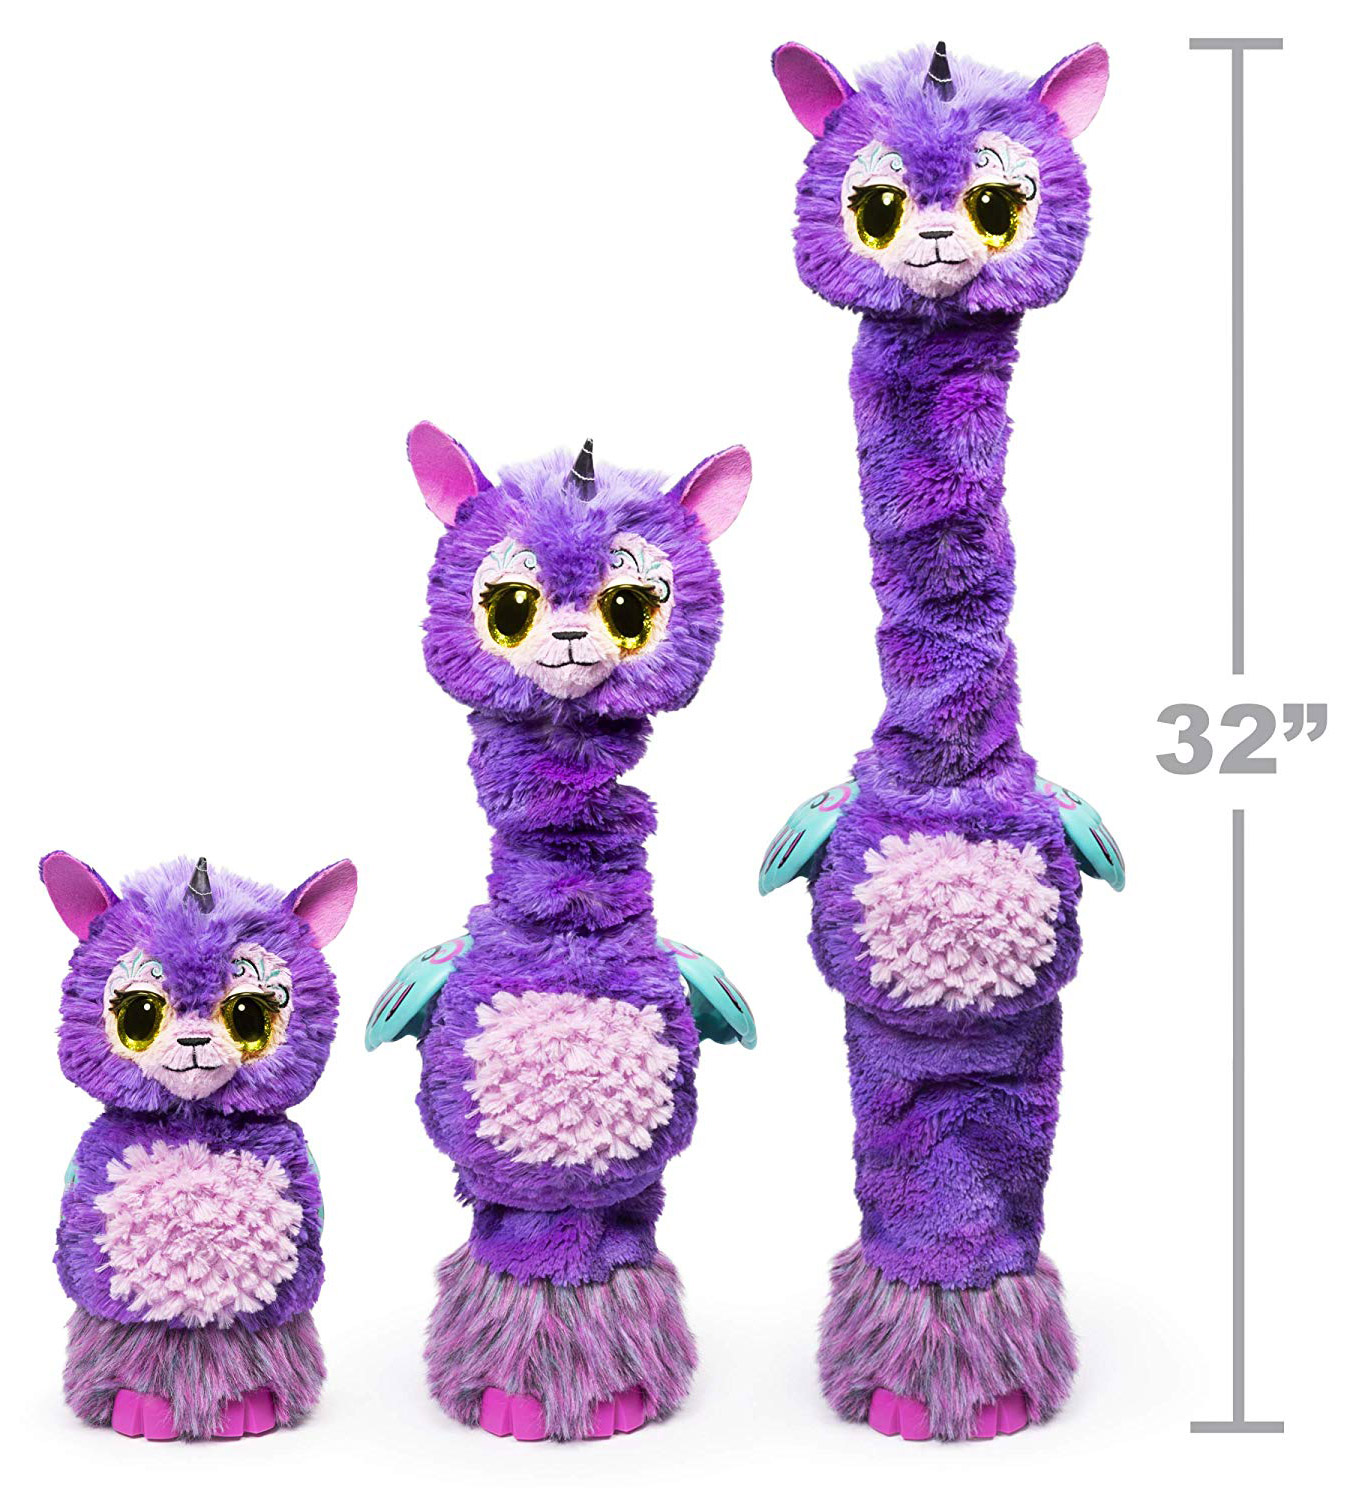 age for hatchimals